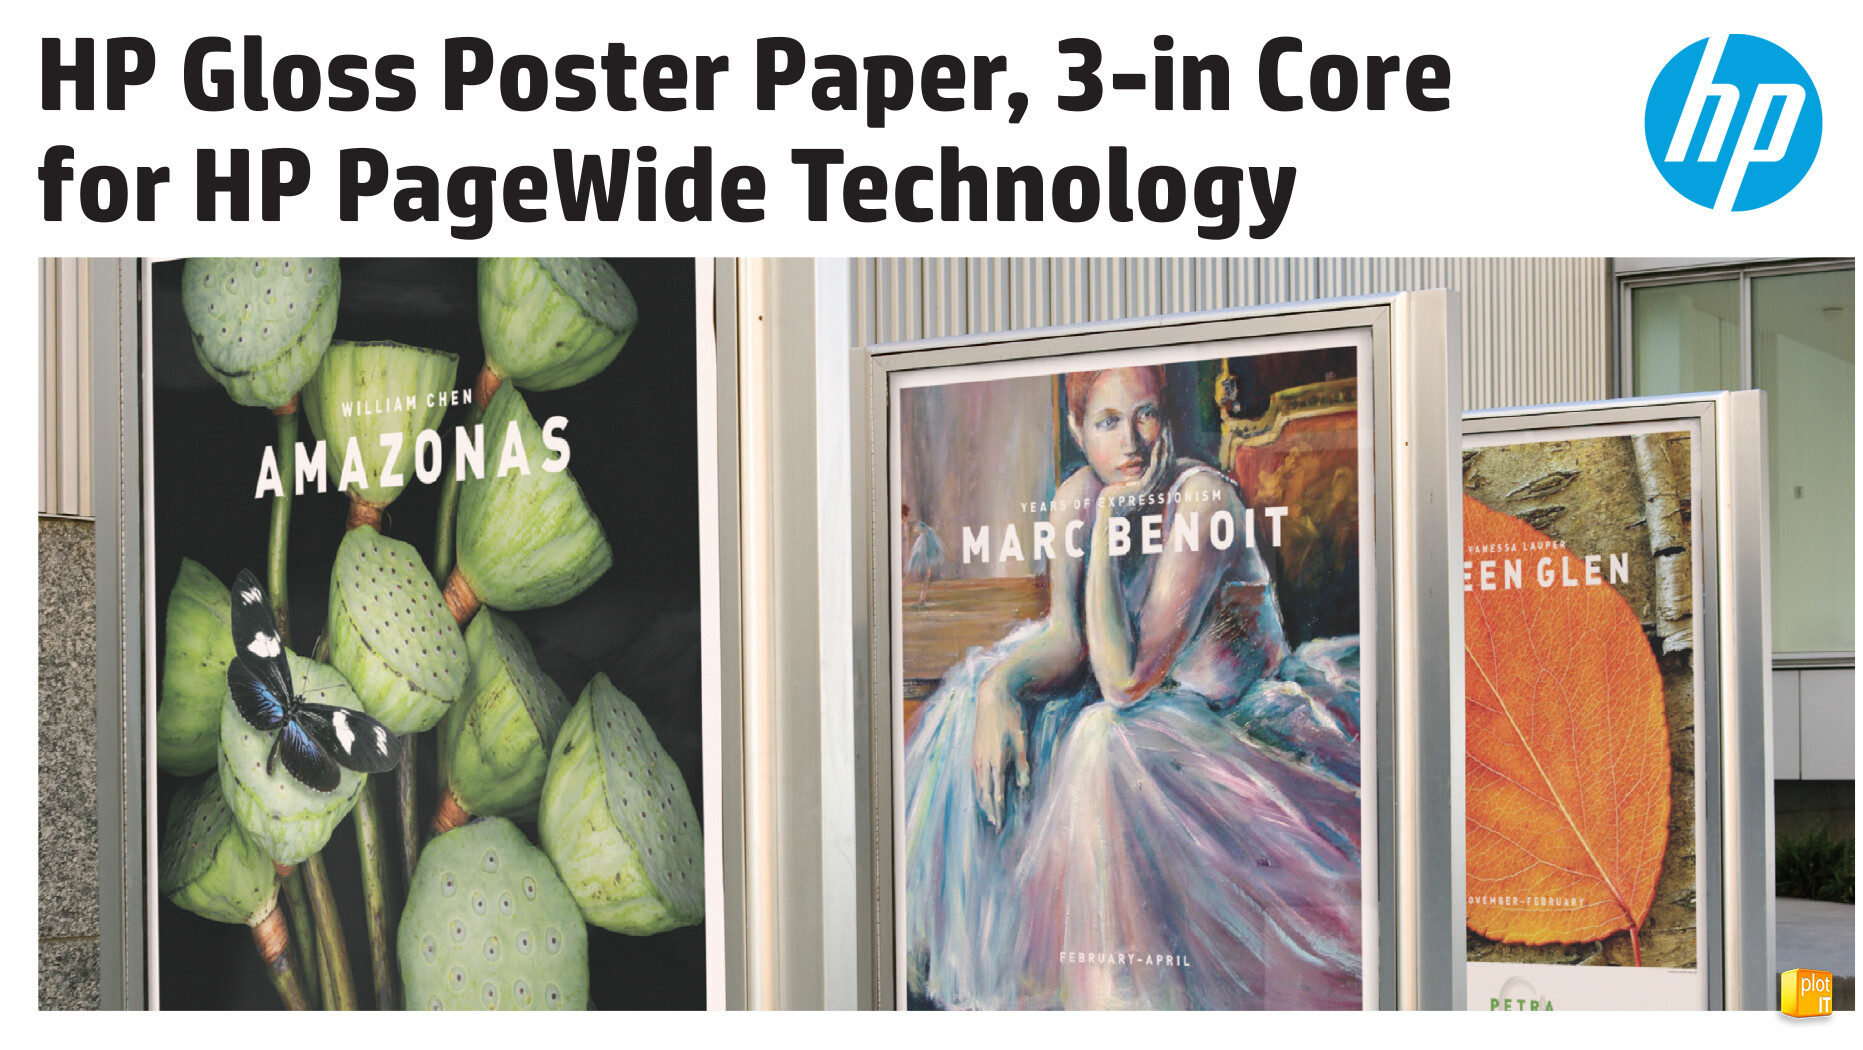 HP Gloss Poster Paper